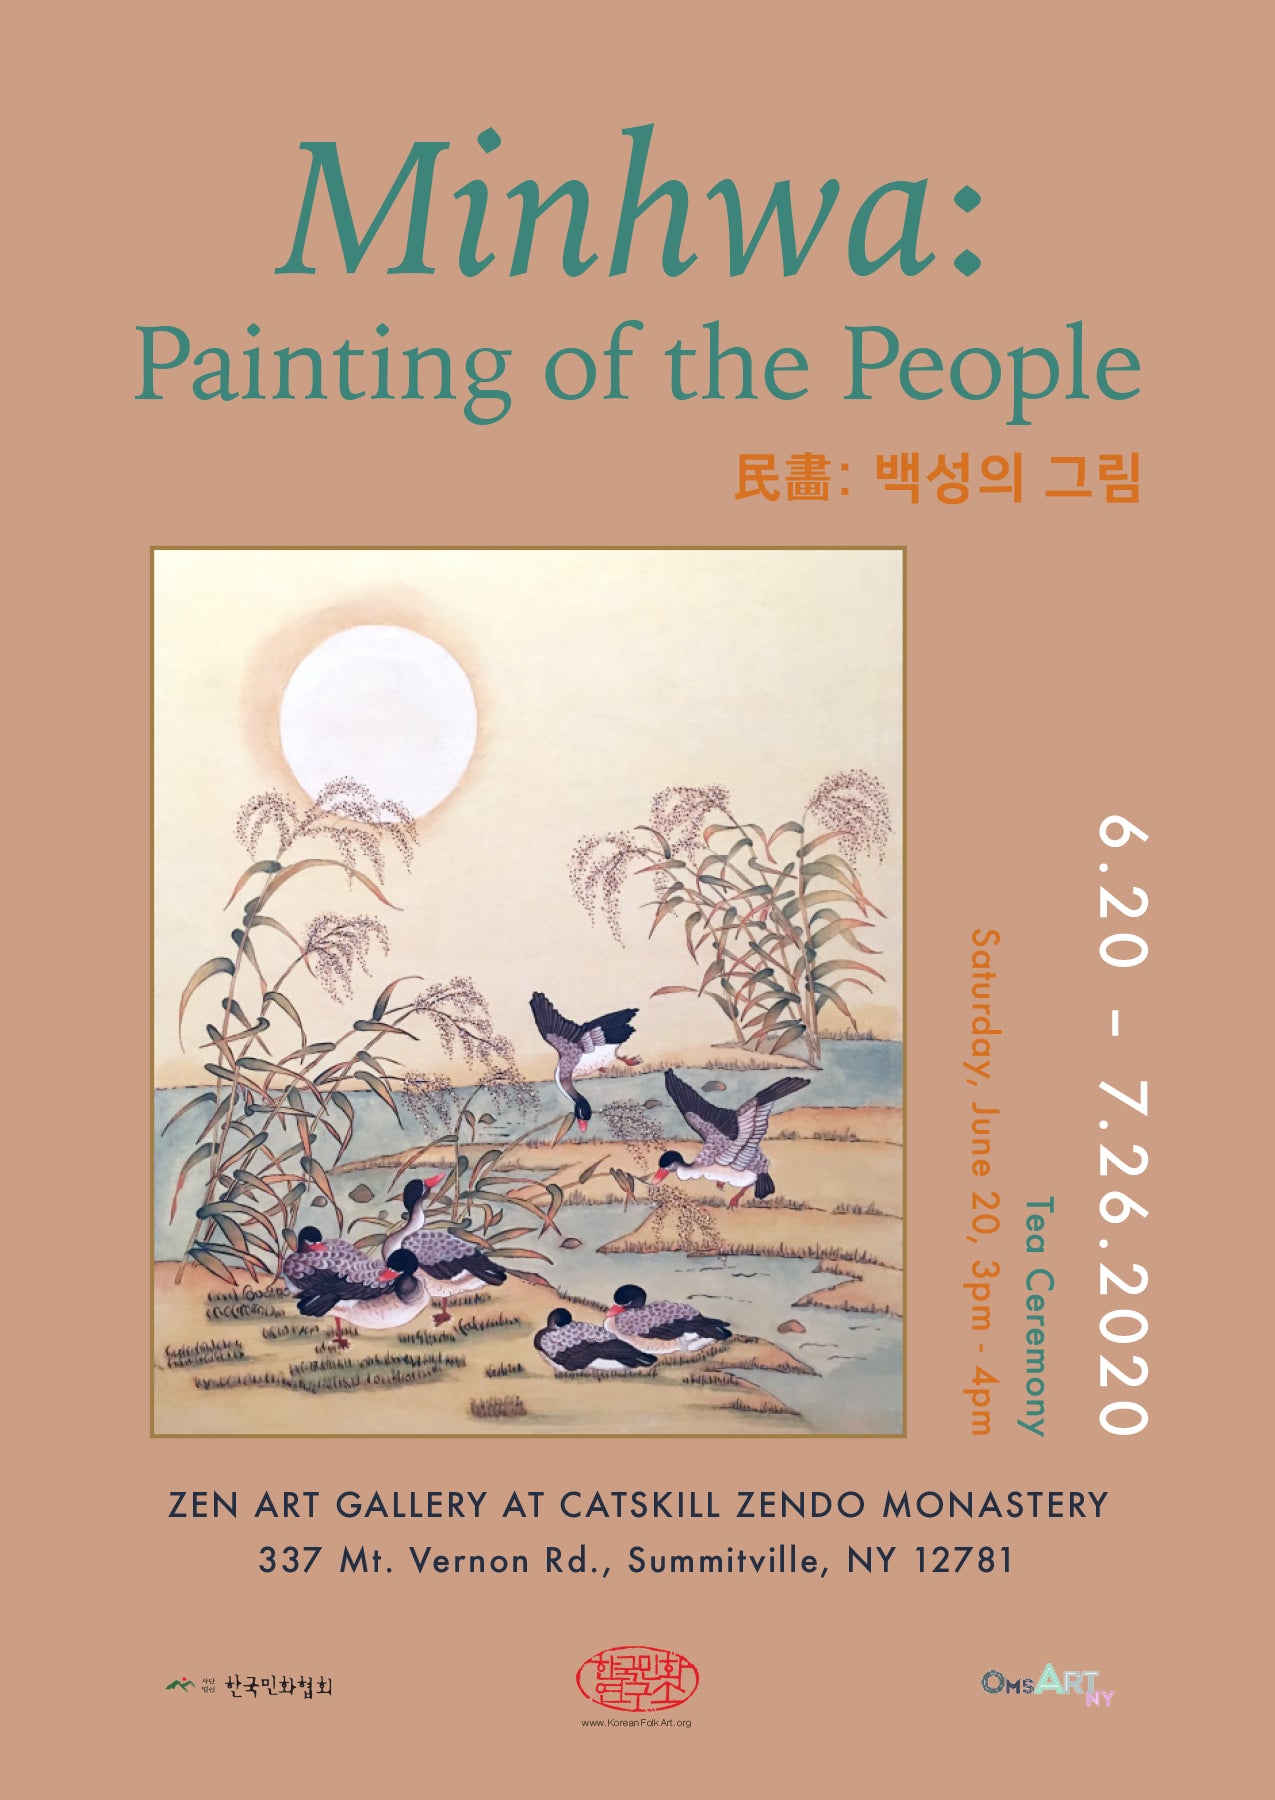 Minhwa: Painting of the People